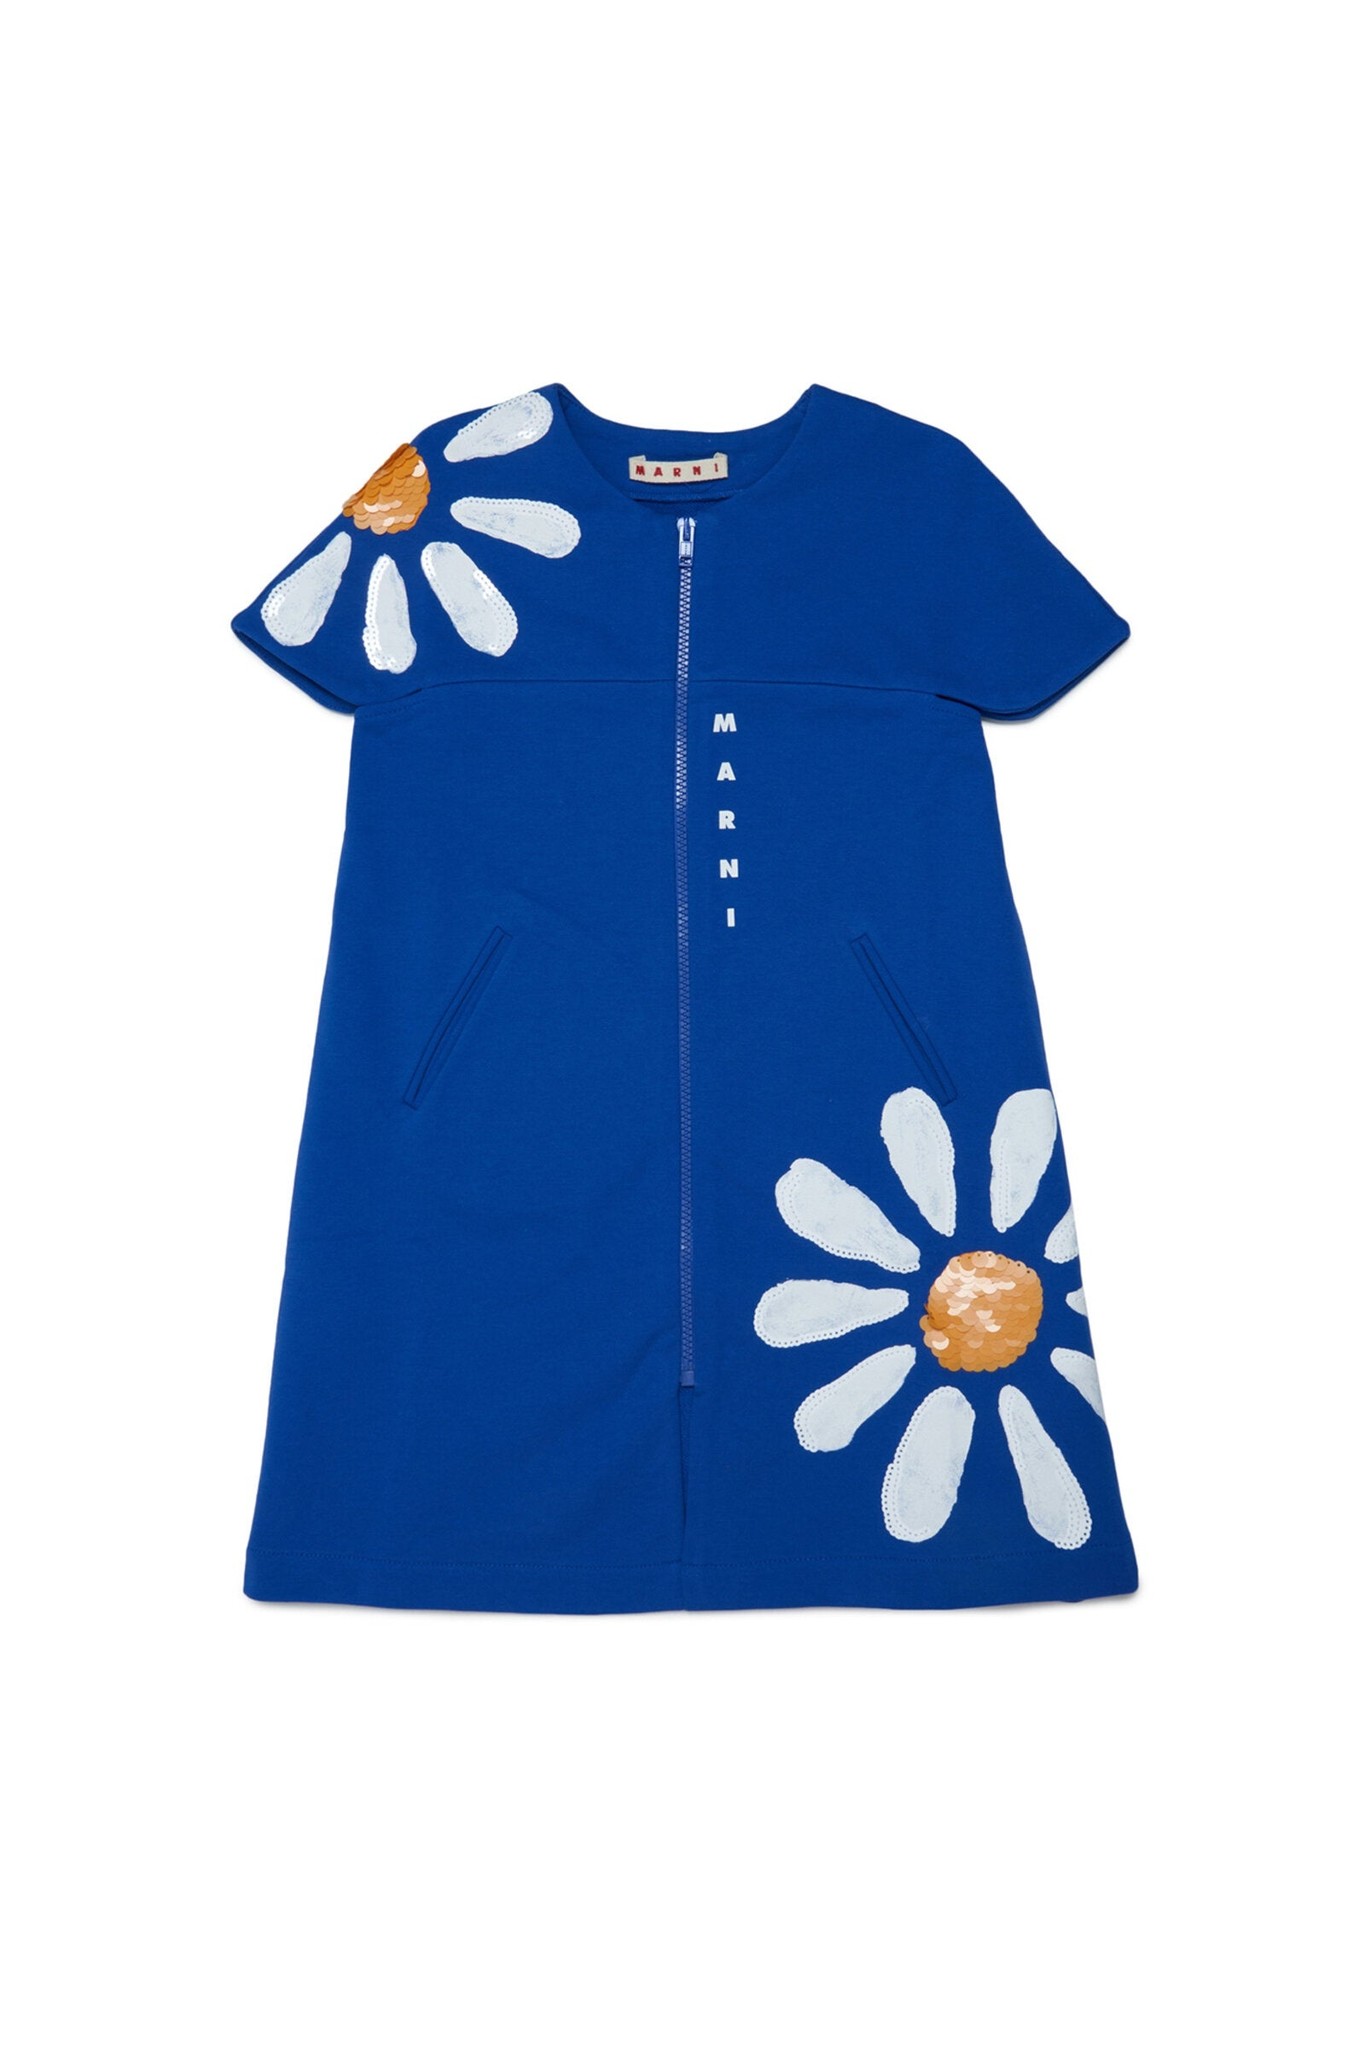 Marni - Blue fleece dress with floral daisy print and sequin